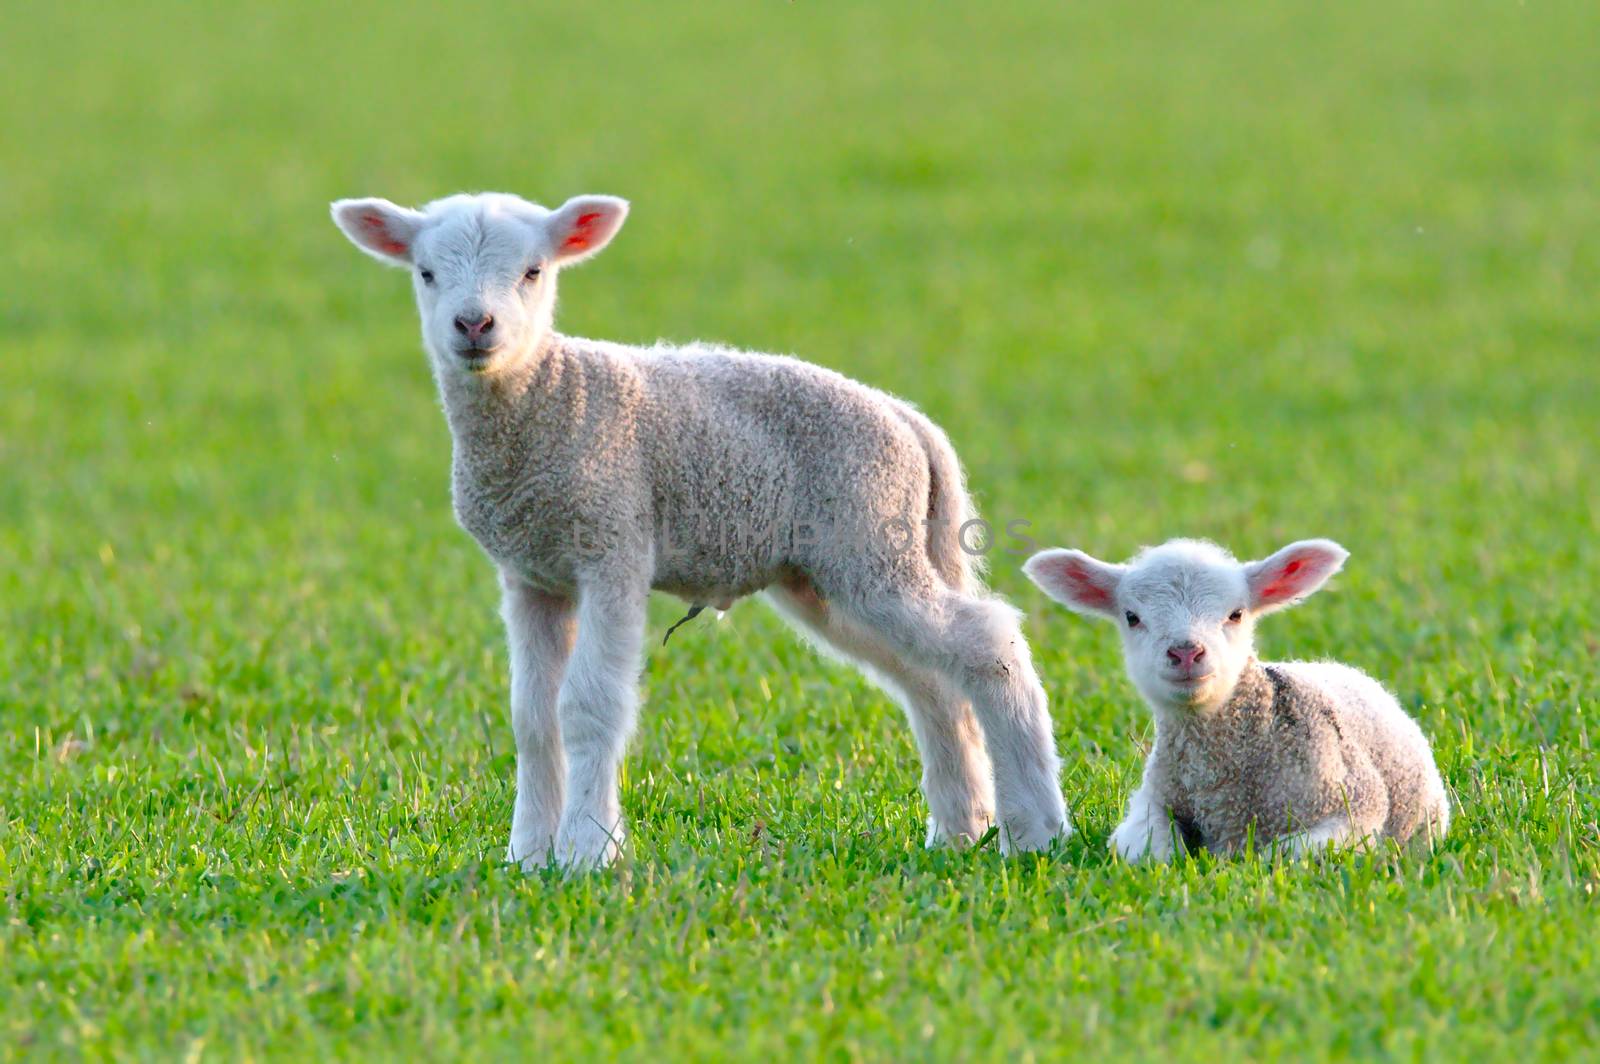 Two cute baby lambs with big pink ears on the fresh green grass smiling to the camera. One standing and other laying on the lawn